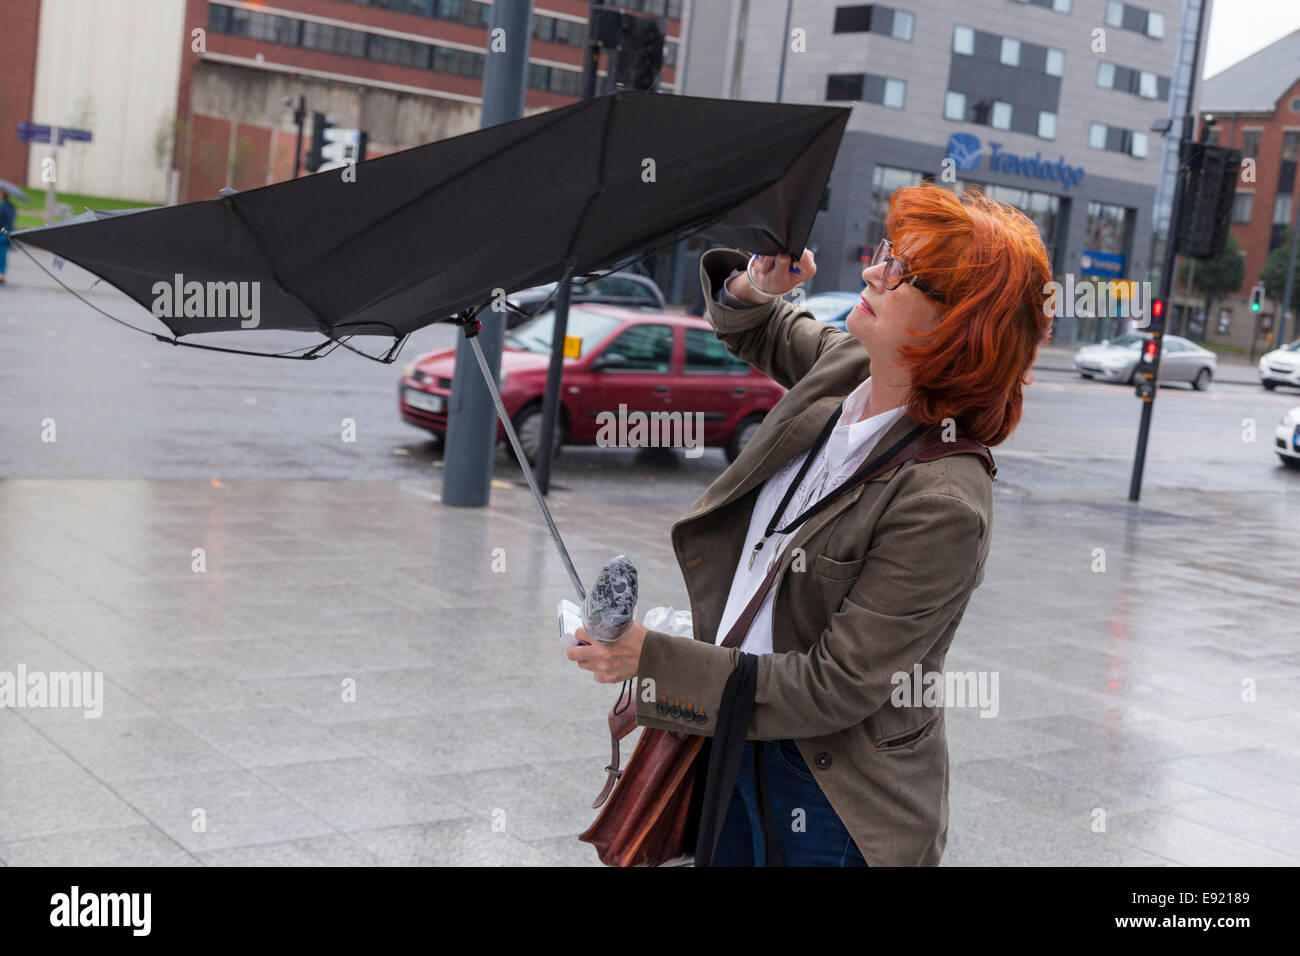 A brolly on a windy day. Woman with an umbrella blown inside out by the wind, Liverpool, England, UK Stock Photo